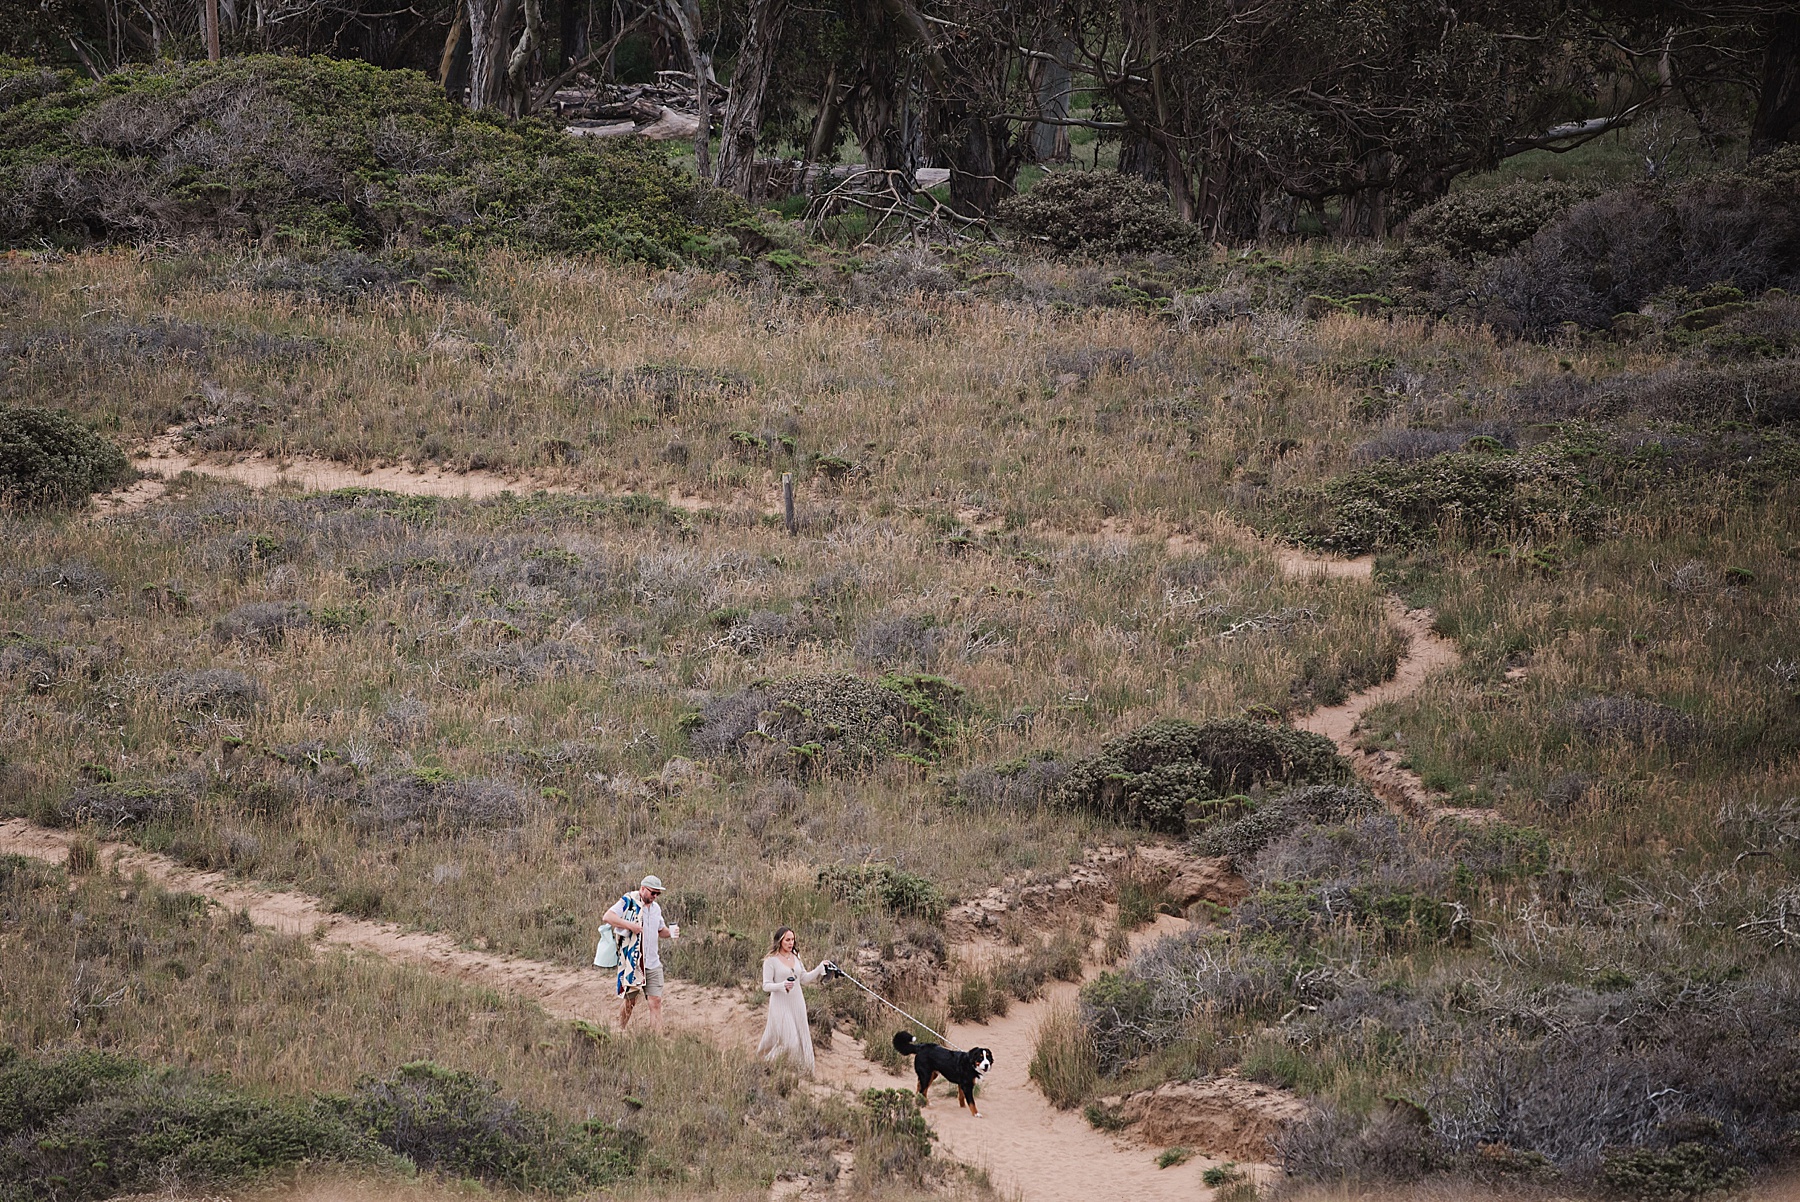 Nikkels Photography, as SLO-based wedding photographer, shares inspiration for a Montana De Oro Surprise Proposal.